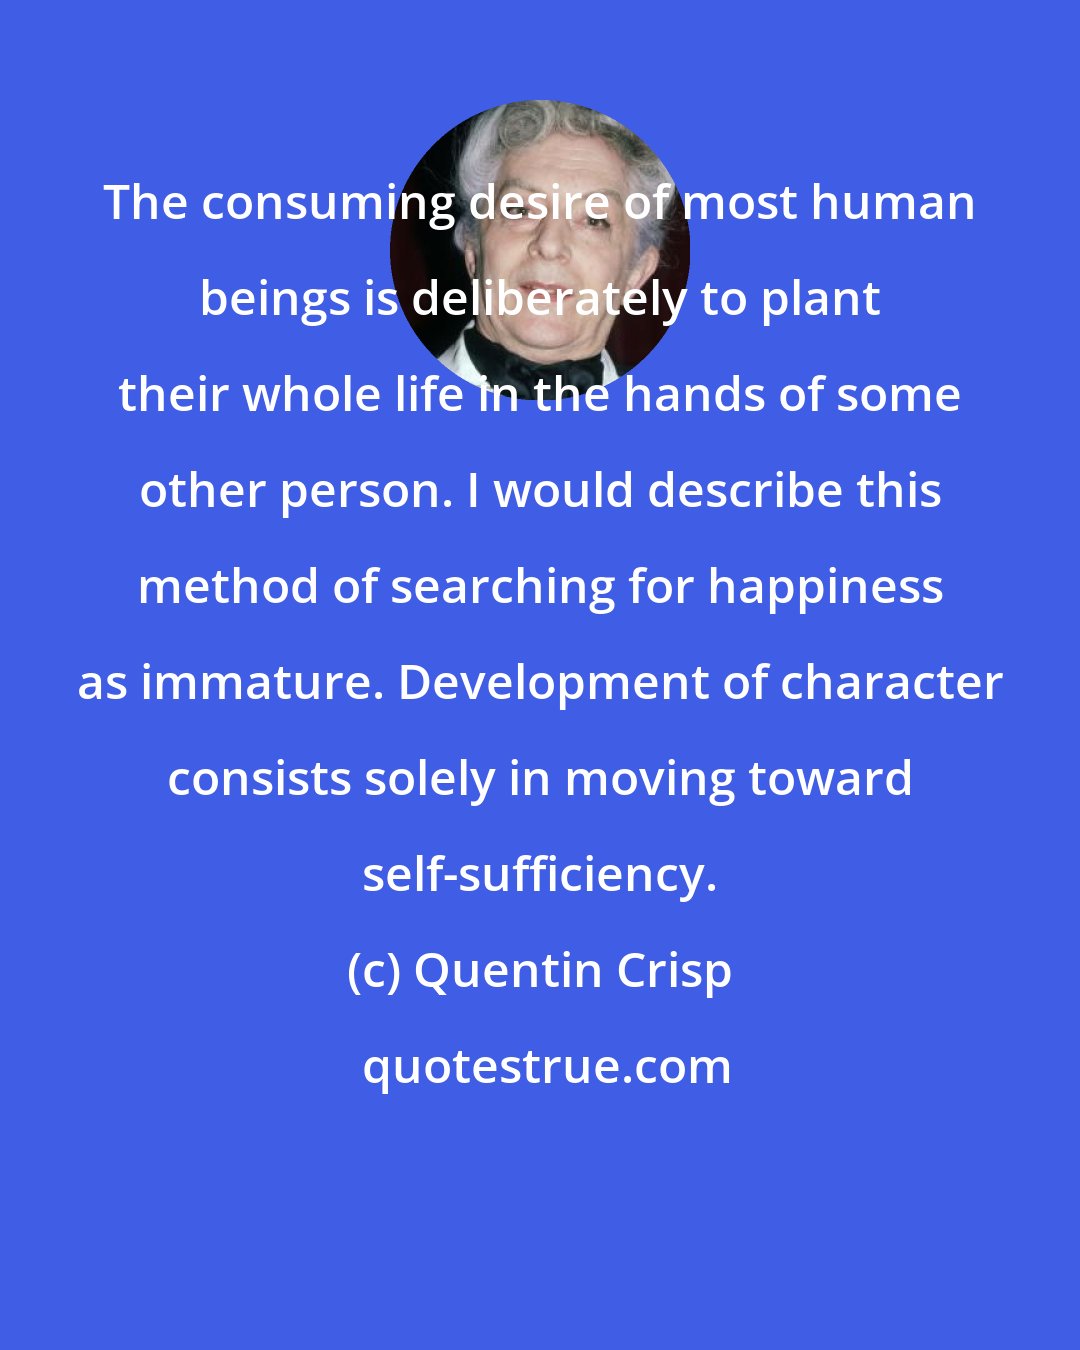 Quentin Crisp: The consuming desire of most human beings is deliberately to plant their whole life in the hands of some other person. I would describe this method of searching for happiness as immature. Development of character consists solely in moving toward self-sufficiency.